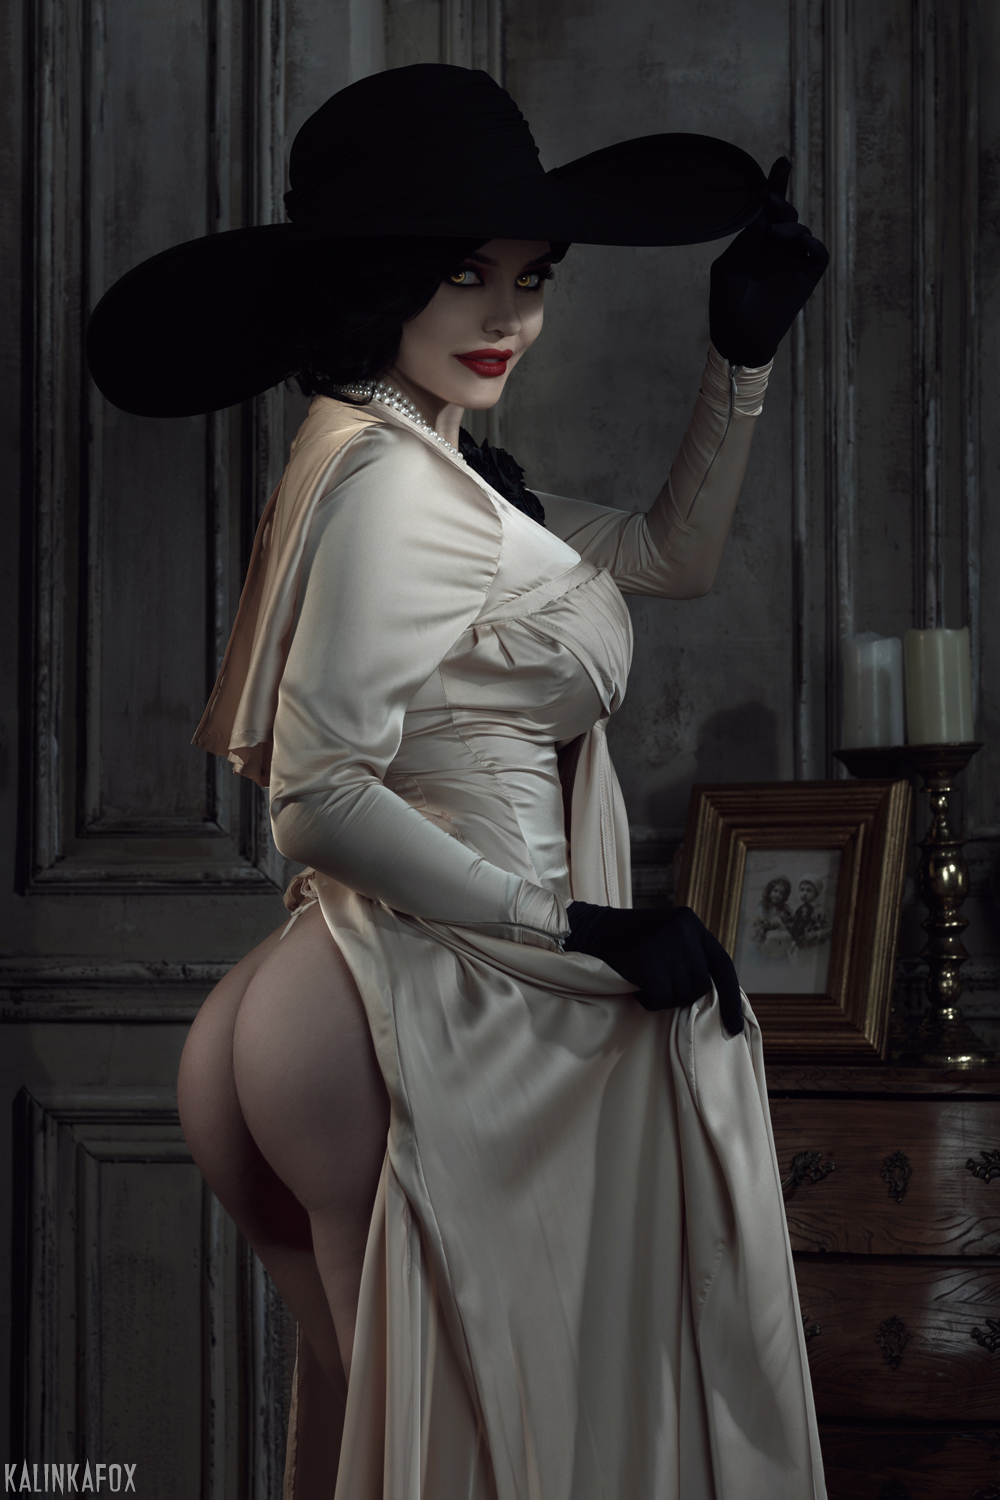 People 1000x1500 Kalinka Fox looking back looking at viewer gloves black gloves white dress black hat white clothing women indoors candles candle holder cosplay photography yellow eyes ass dress women hat Resident Evil 8: Village Resident Evil smiling video game girls model women with hats portrait display Lady Dimitrescu red lipstick